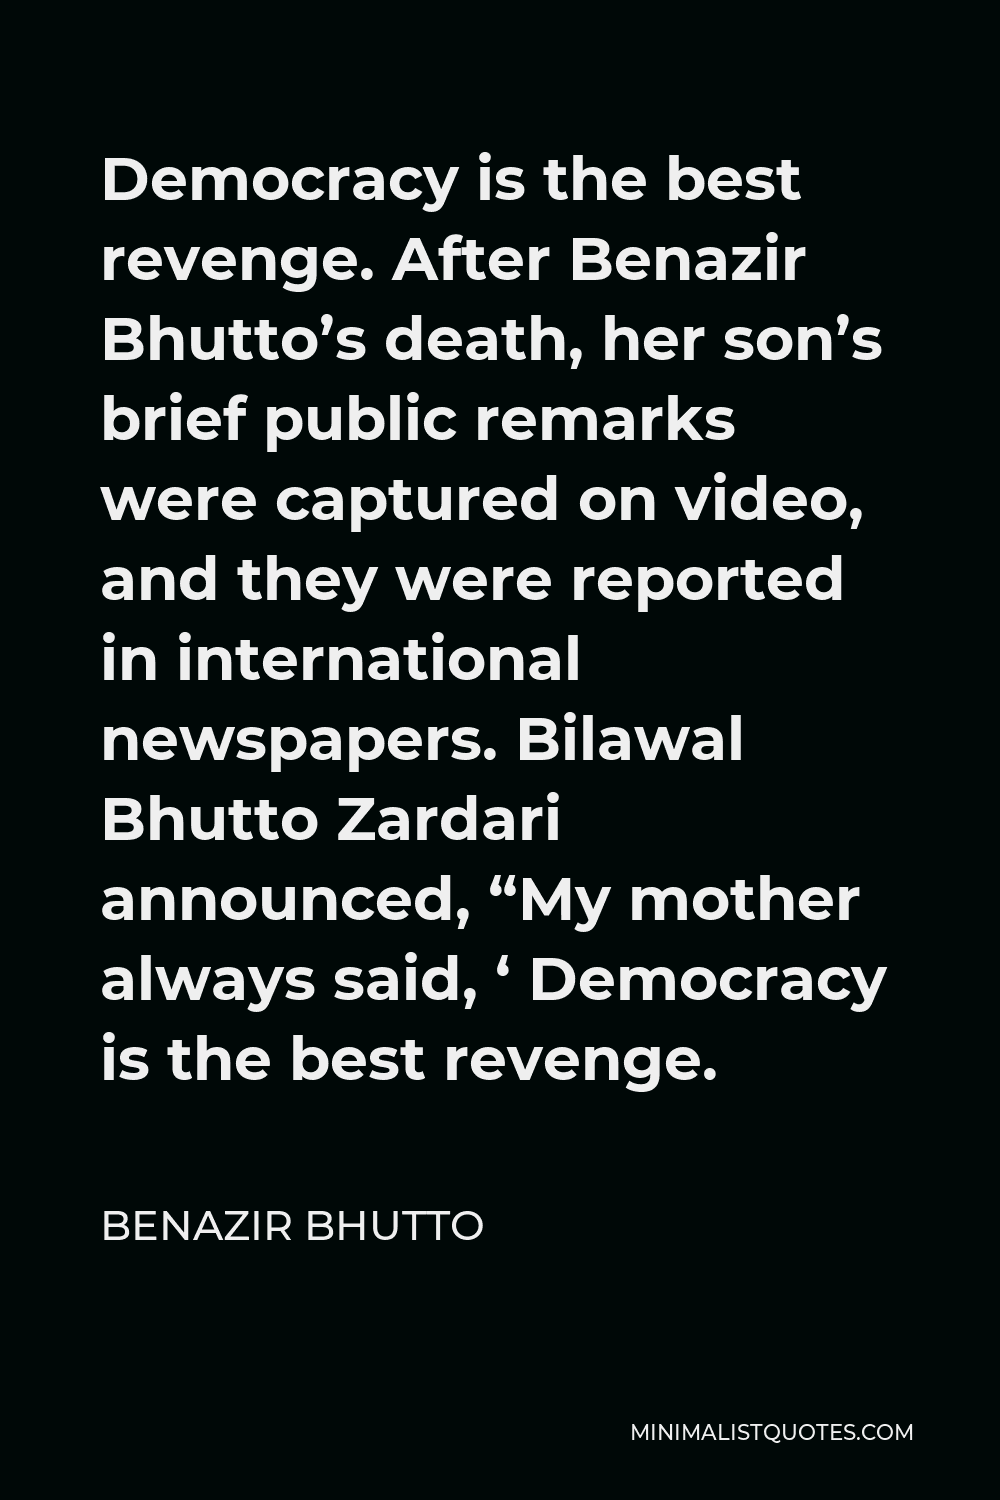 Benazir Bhutto Quote - Democracy is the best revenge. After Benazir Bhutto’s death, her son’s brief public remarks were captured on video, and they were reported in international newspapers. Bilawal Bhutto Zardari announced, “My mother always said, ‘ Democracy is the best revenge.